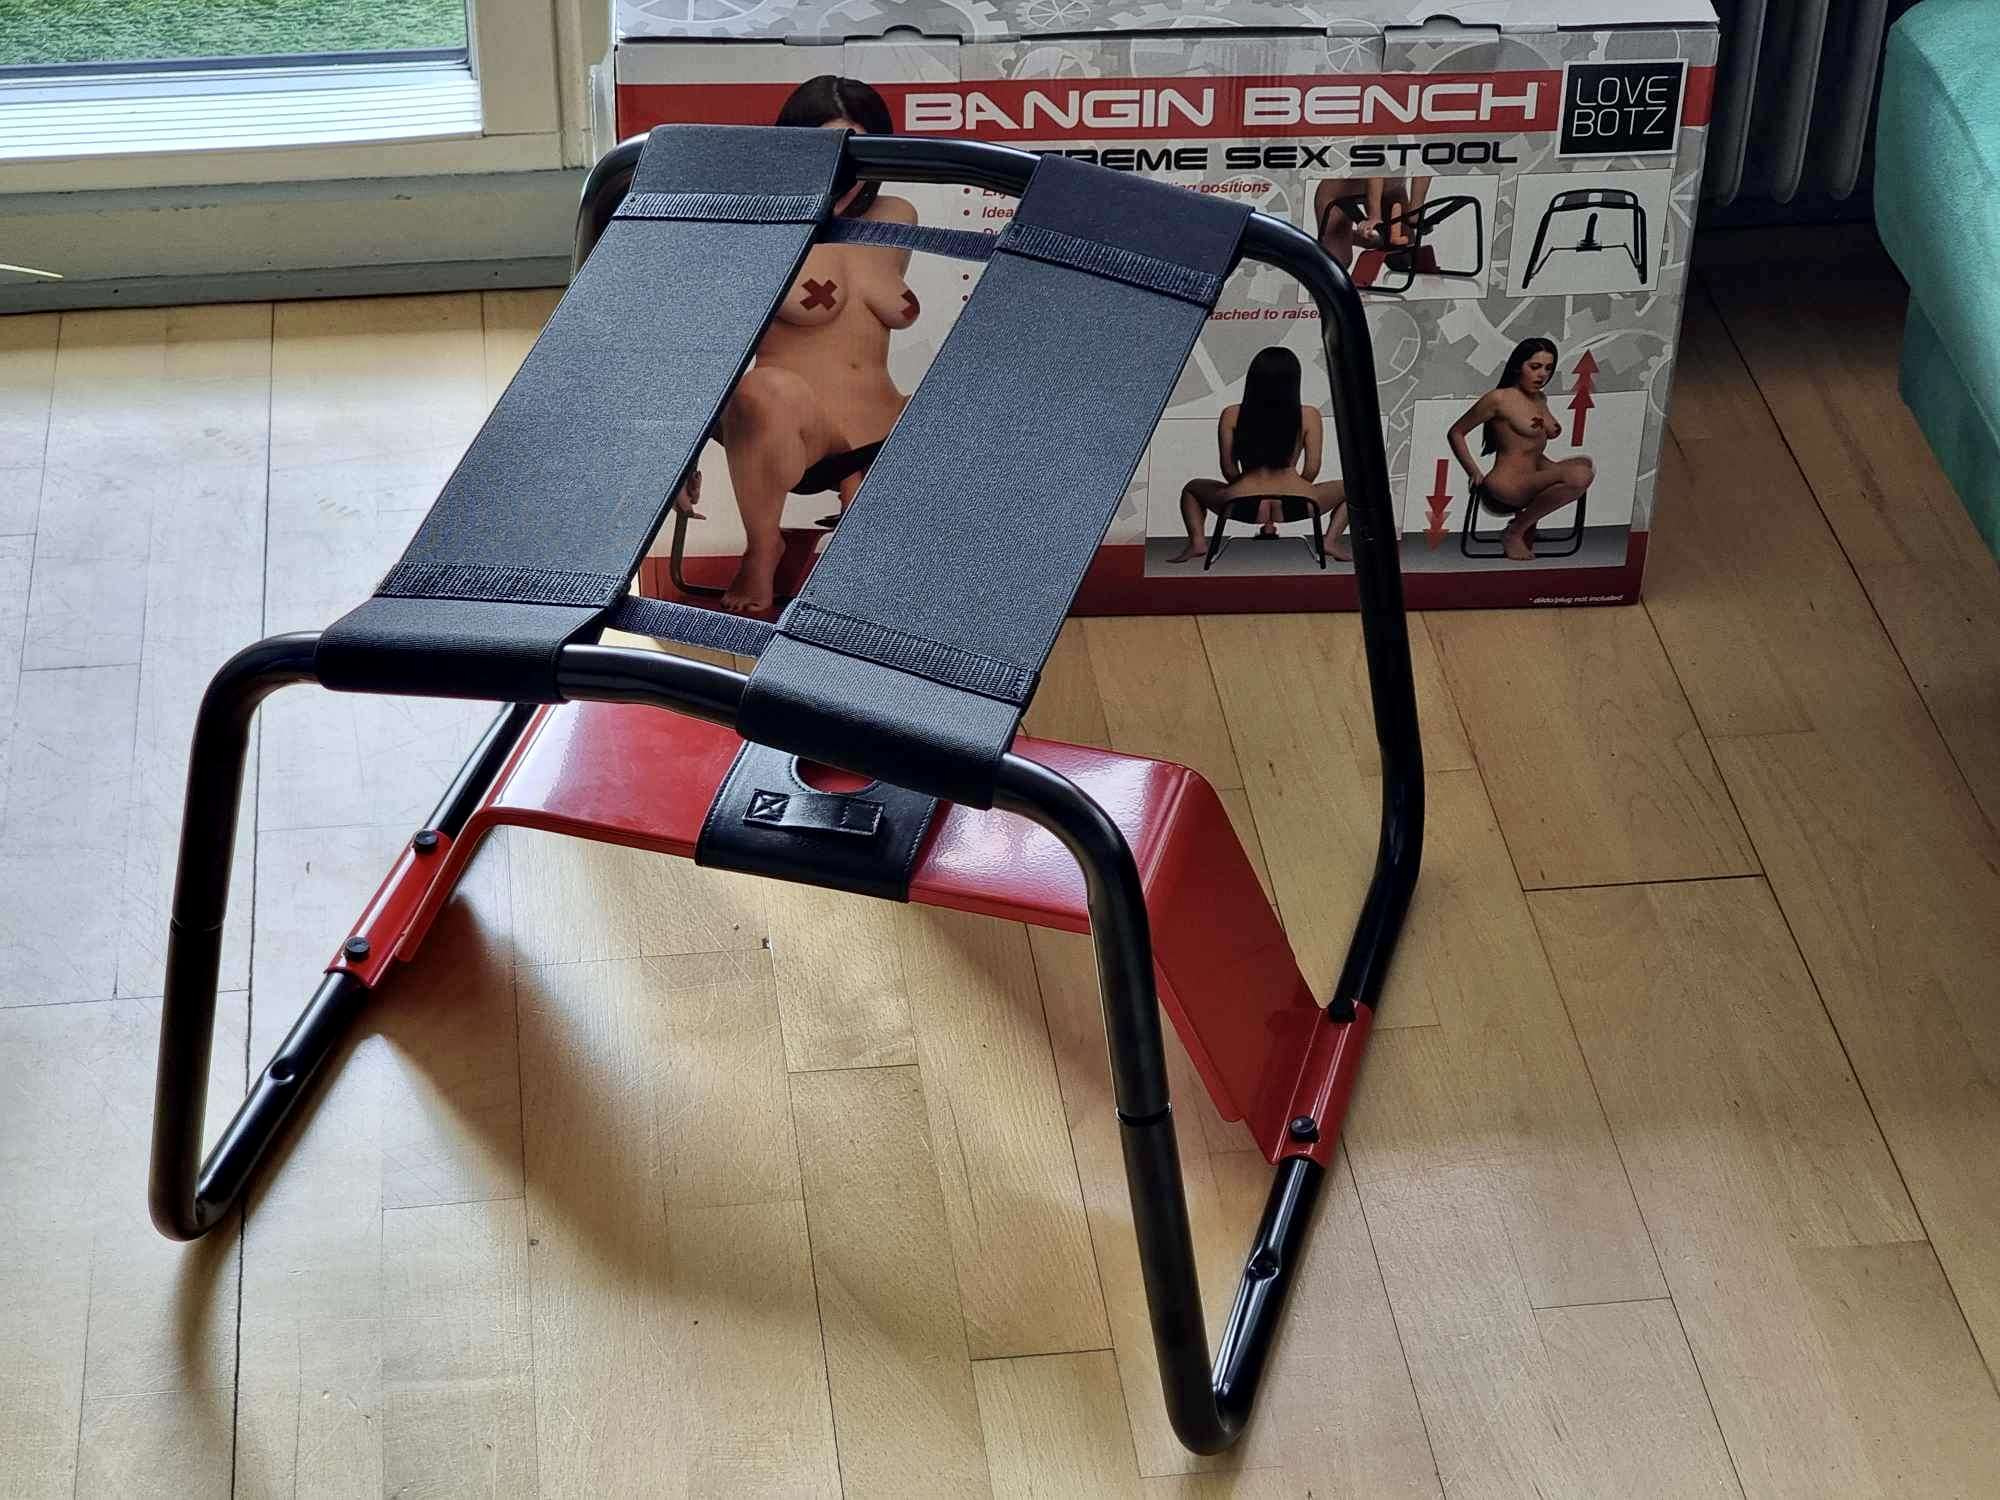 My Personal Experiences with Lovebotz Bangin Bench Extreme Sex Stool